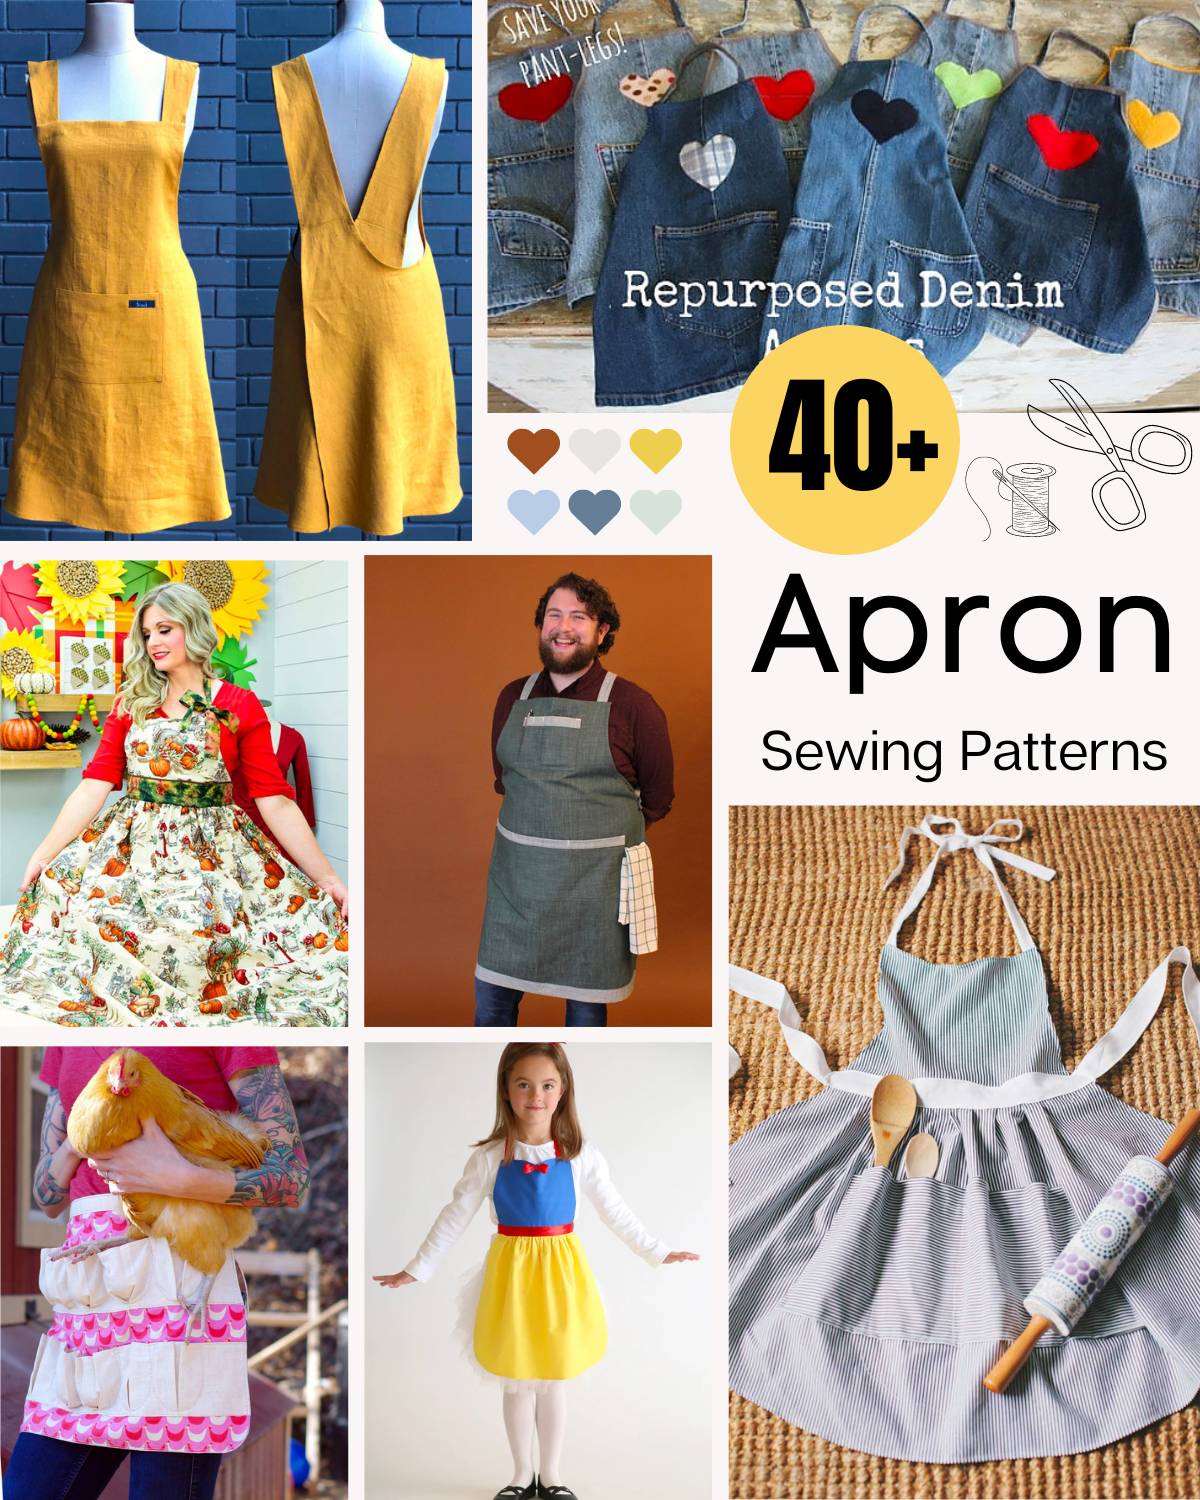 Are you going to sew yourself an apron that is both functional and comfortable? We've got a variety of free apron patterns for you! Here is our collection of apron sewing patterns, which includes bib aprons, cross-back and waist aprons, and aprons for children and adults.